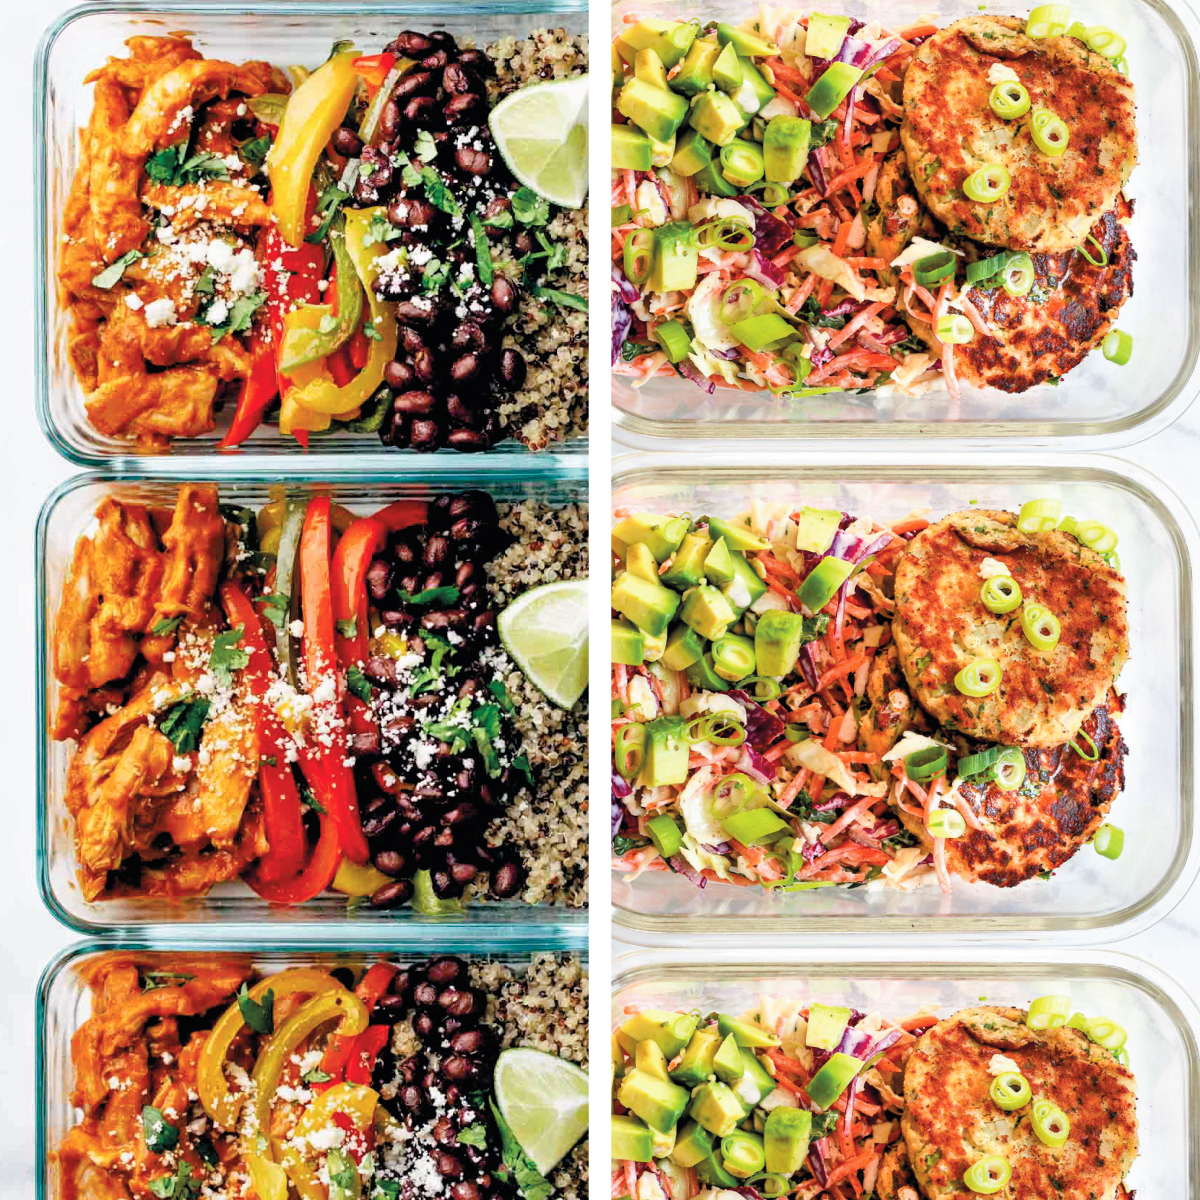 25 High-Protein Meal Prep Recipes - High-Protein Meal Ideas